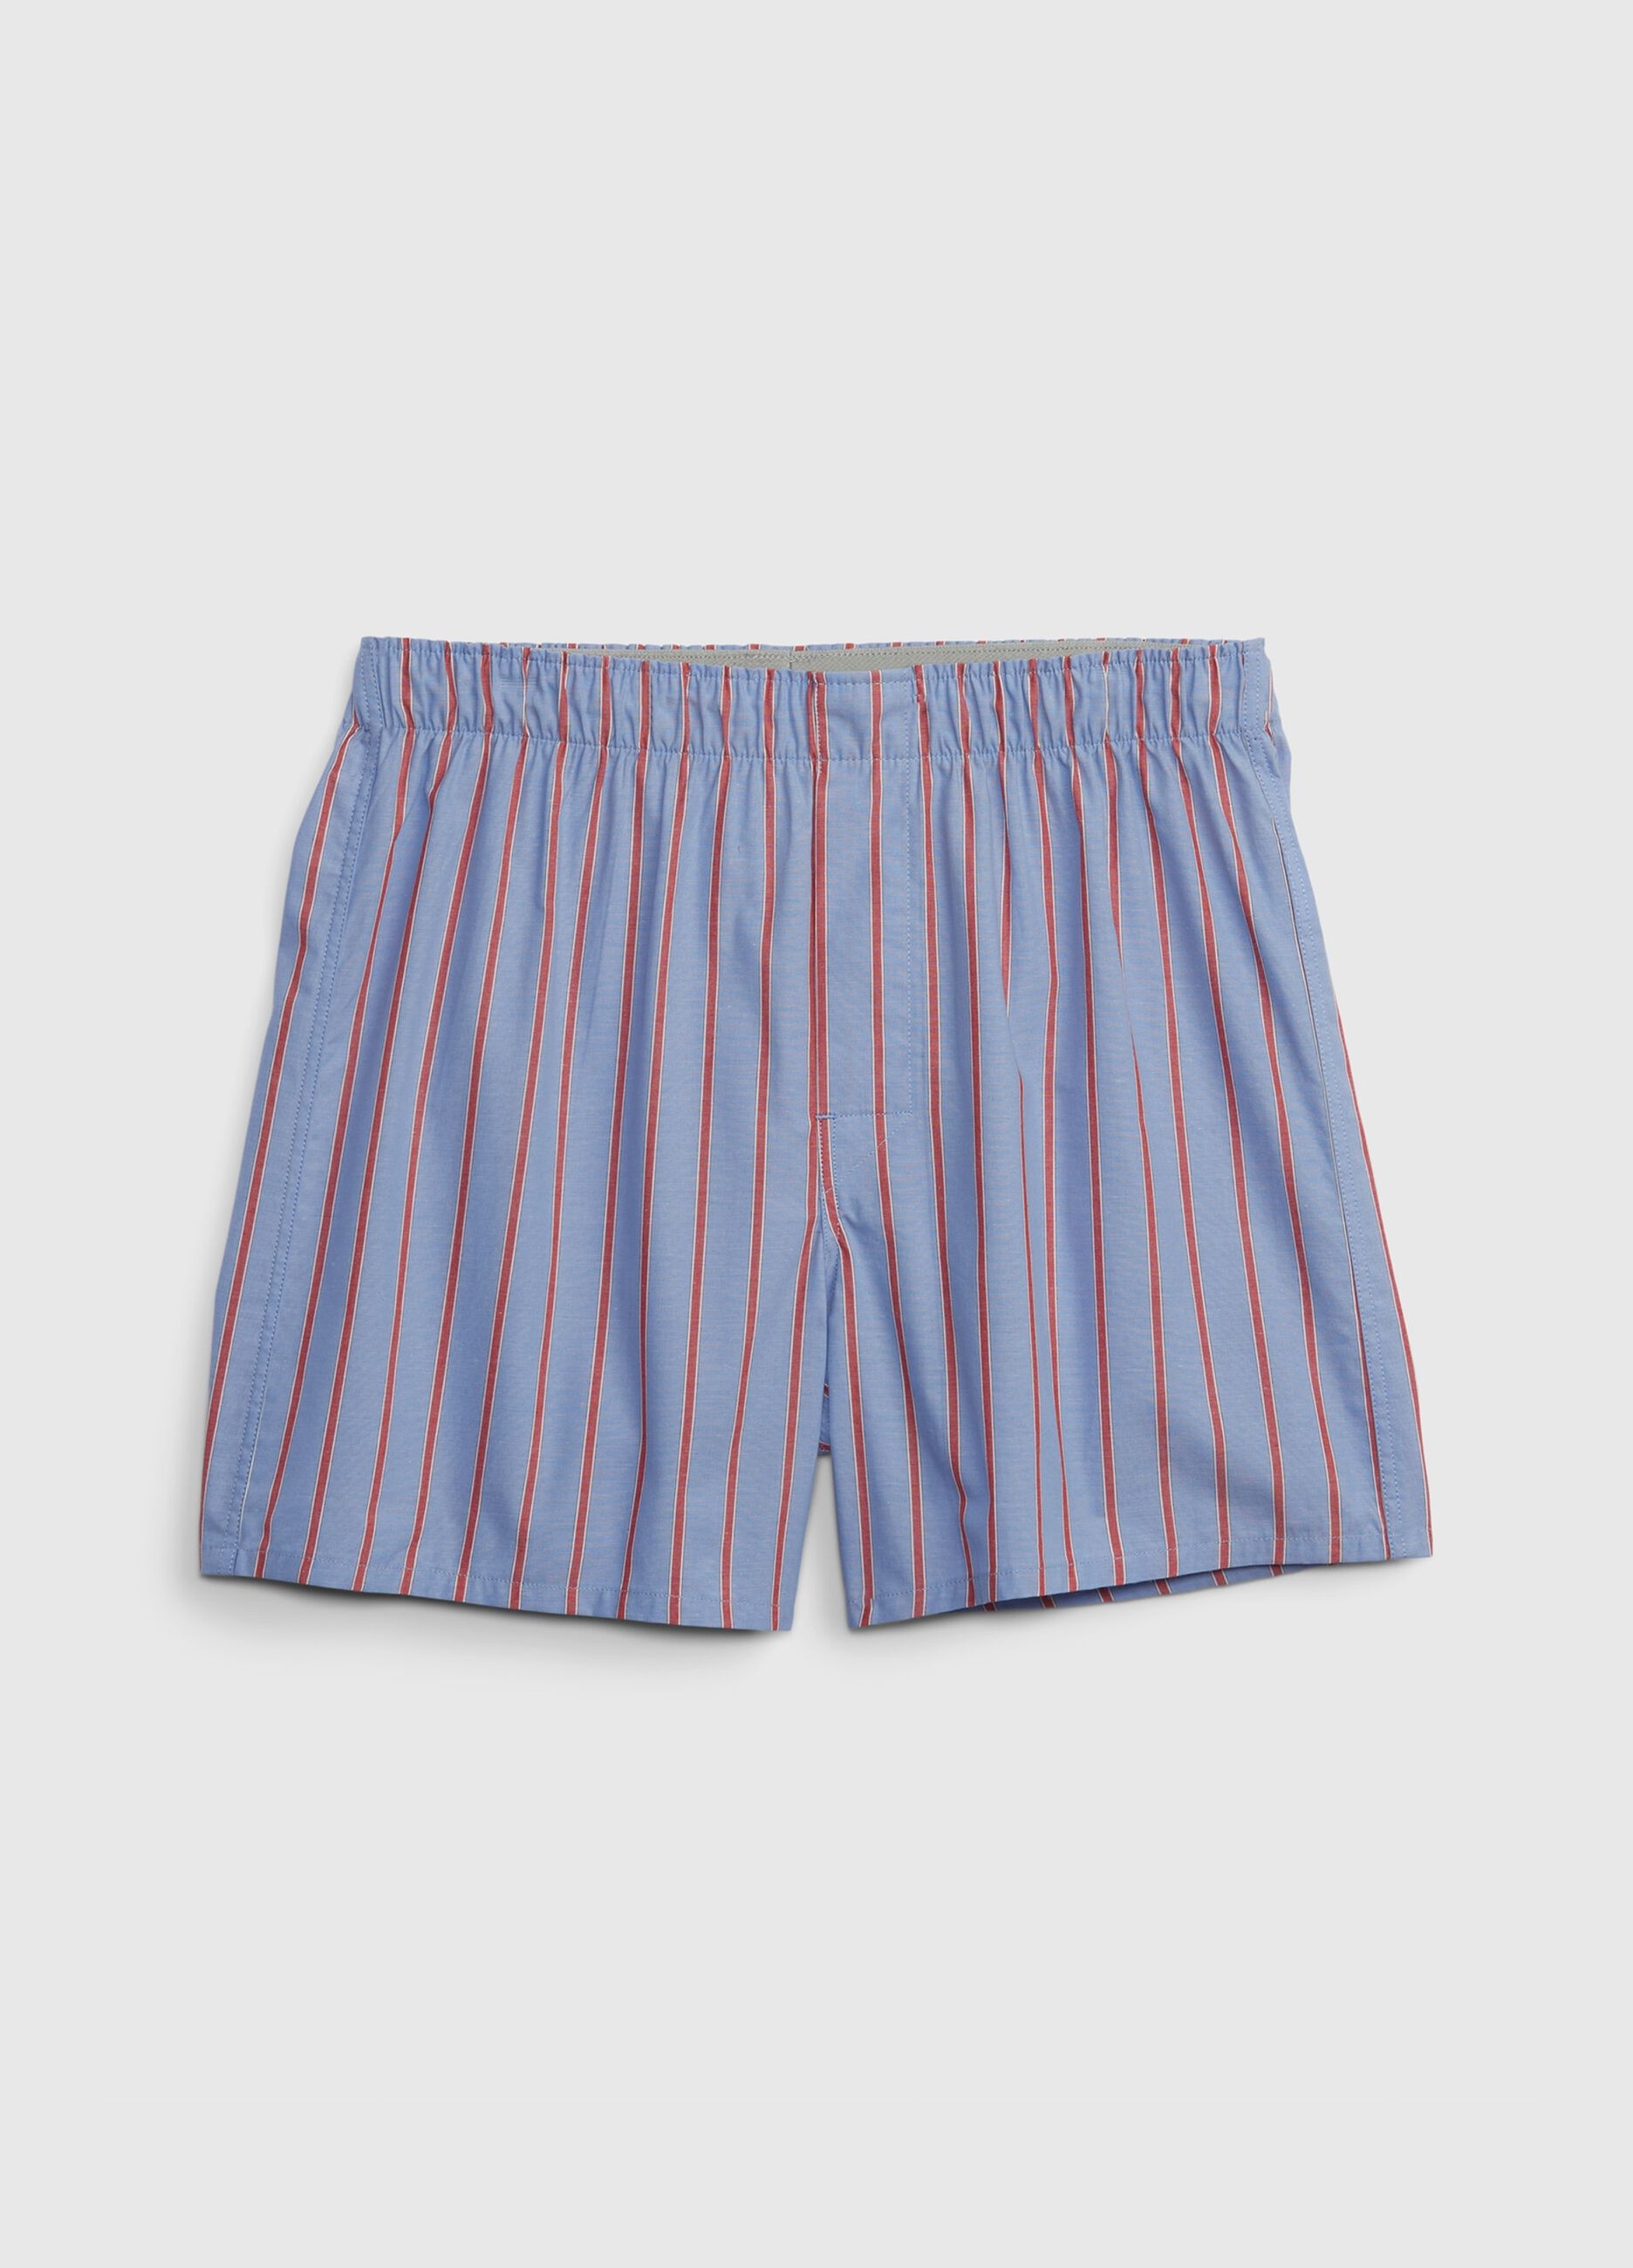 Cotton boxer shorts with striped pattern